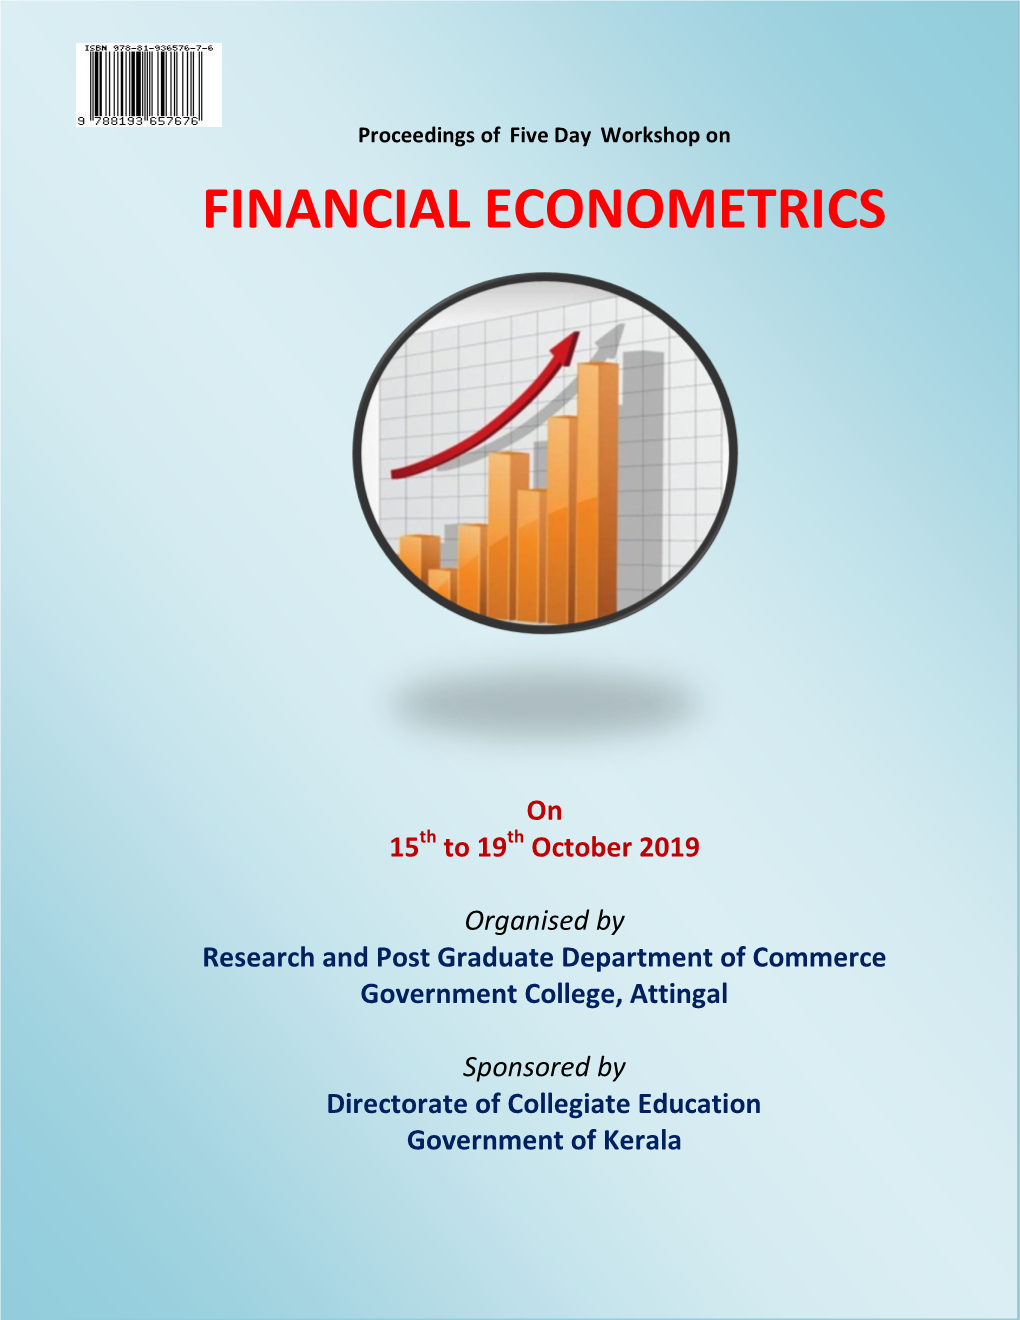 Financial Econometrics from 15Th to 19Th October, 2019